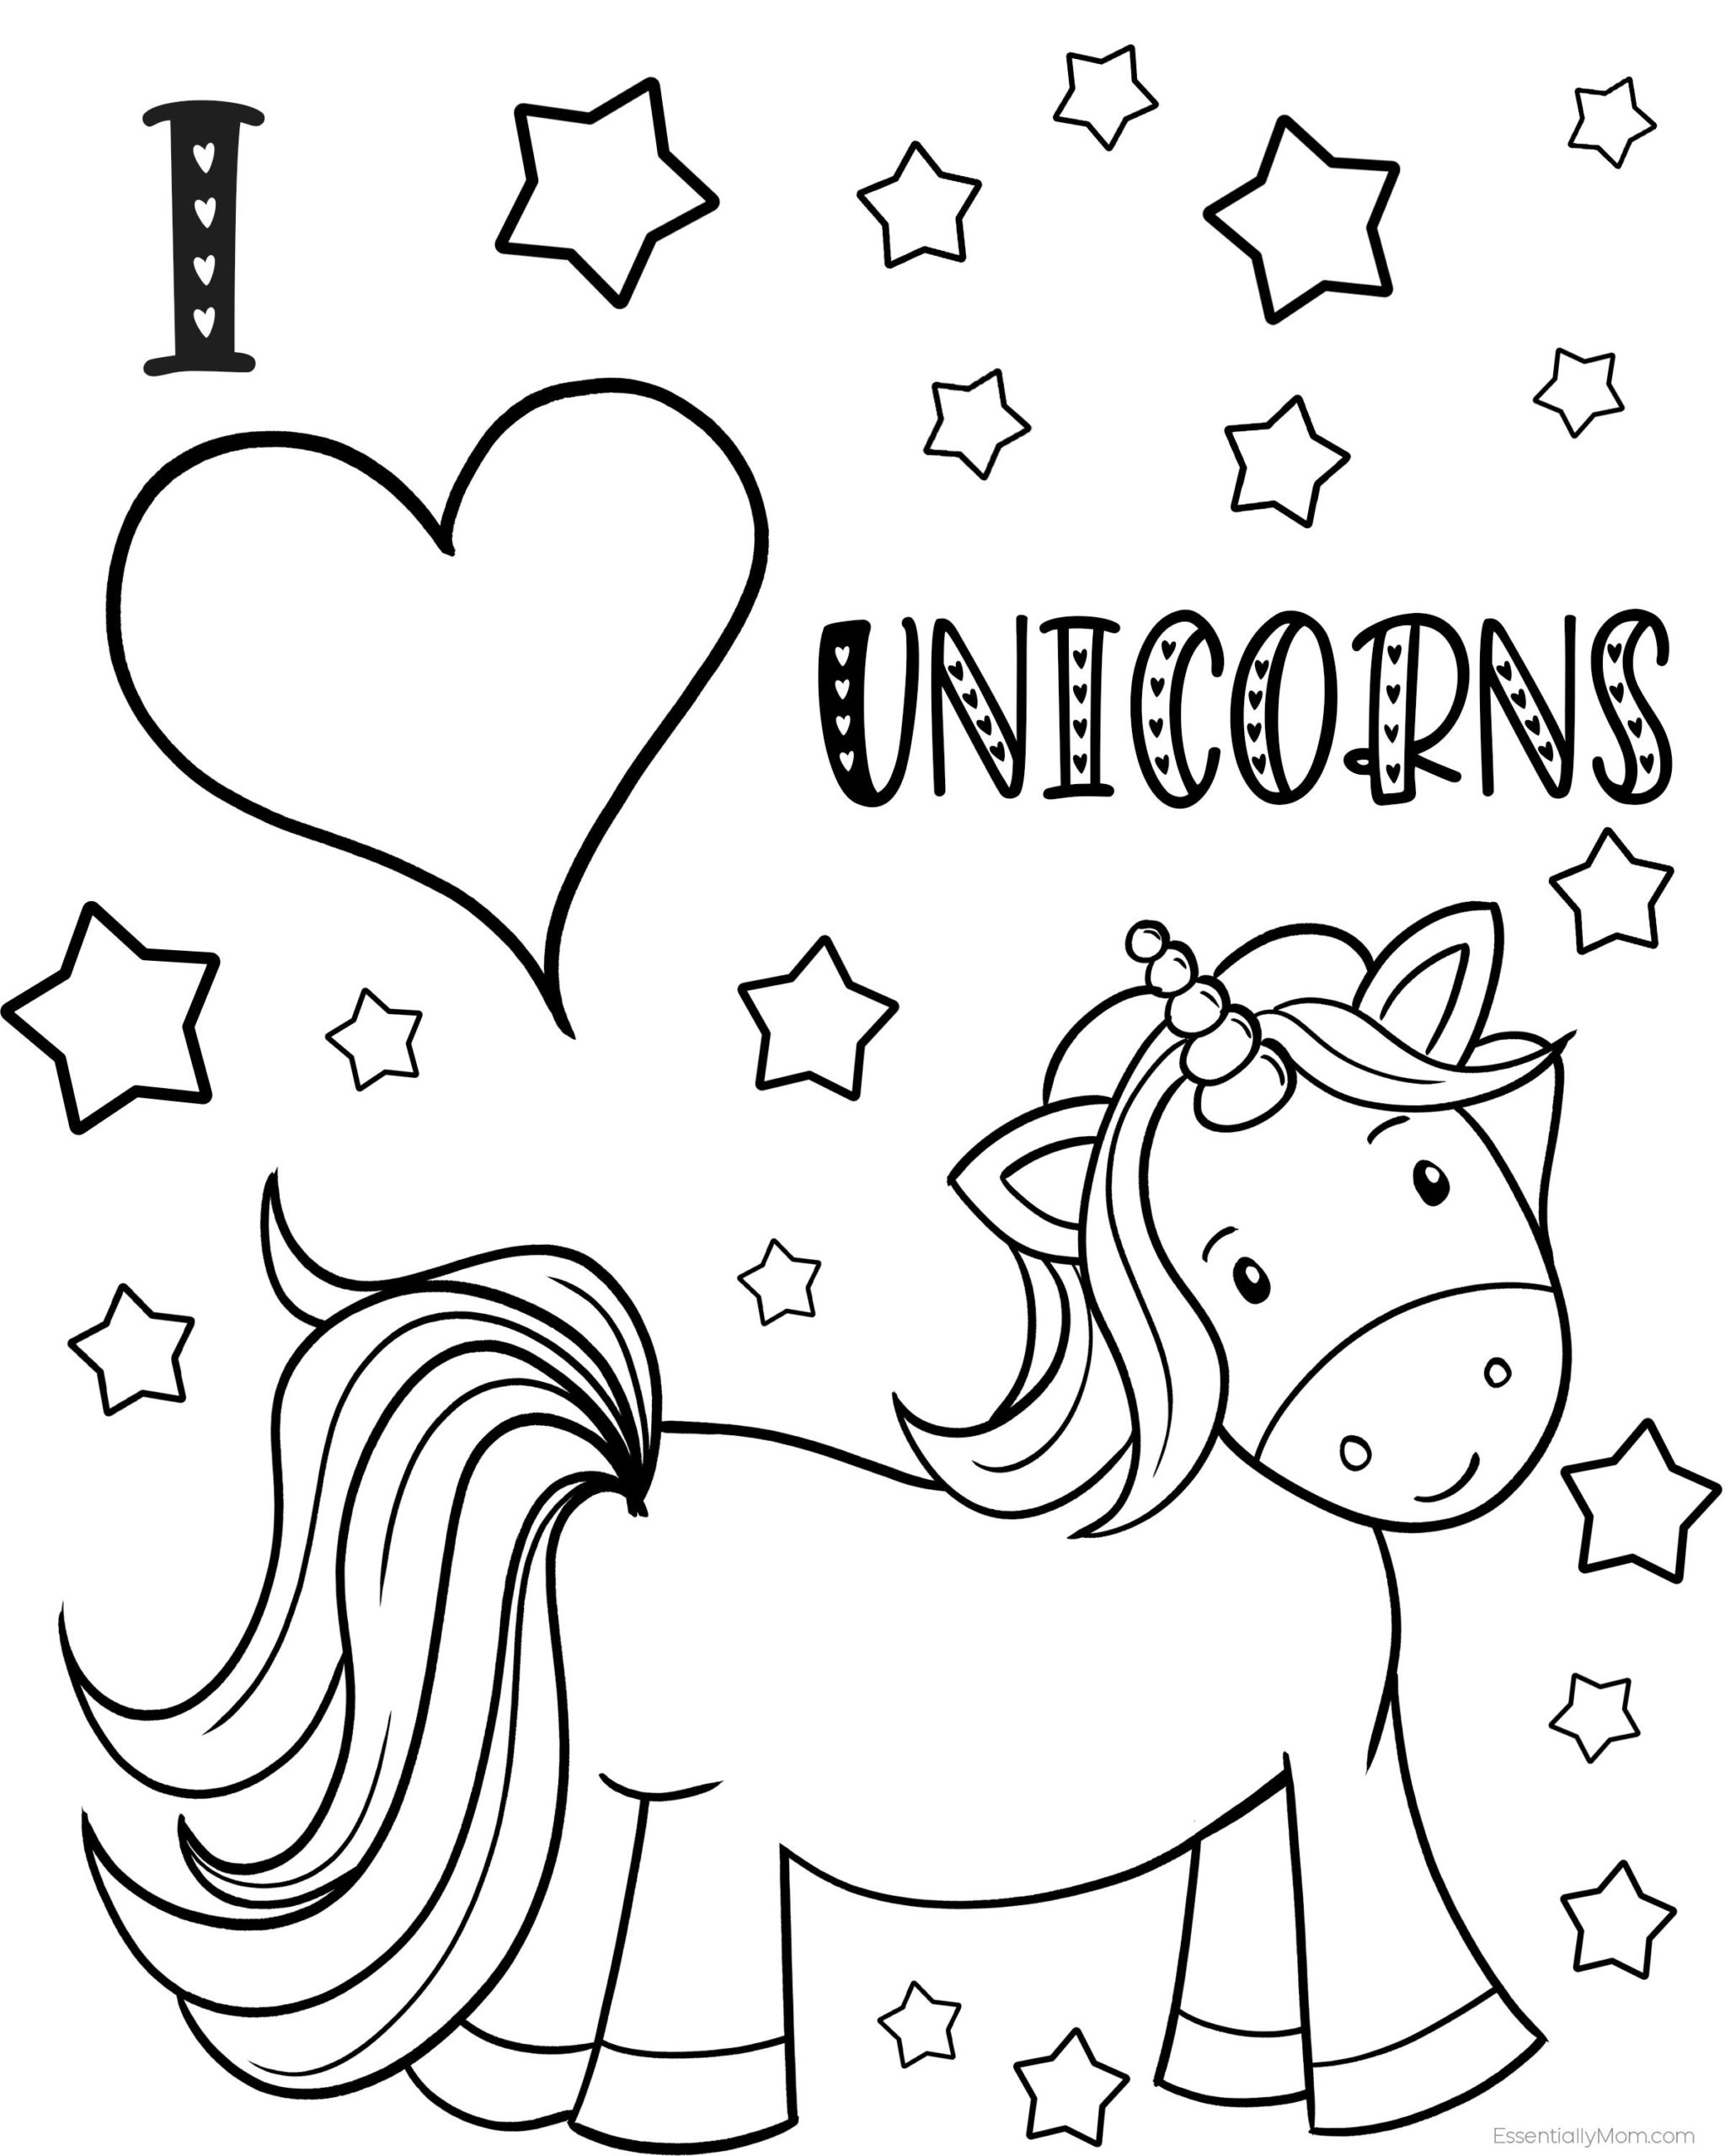 FREE Unicorn Coloring Pages Printable for Kids   Unicorn coloring book